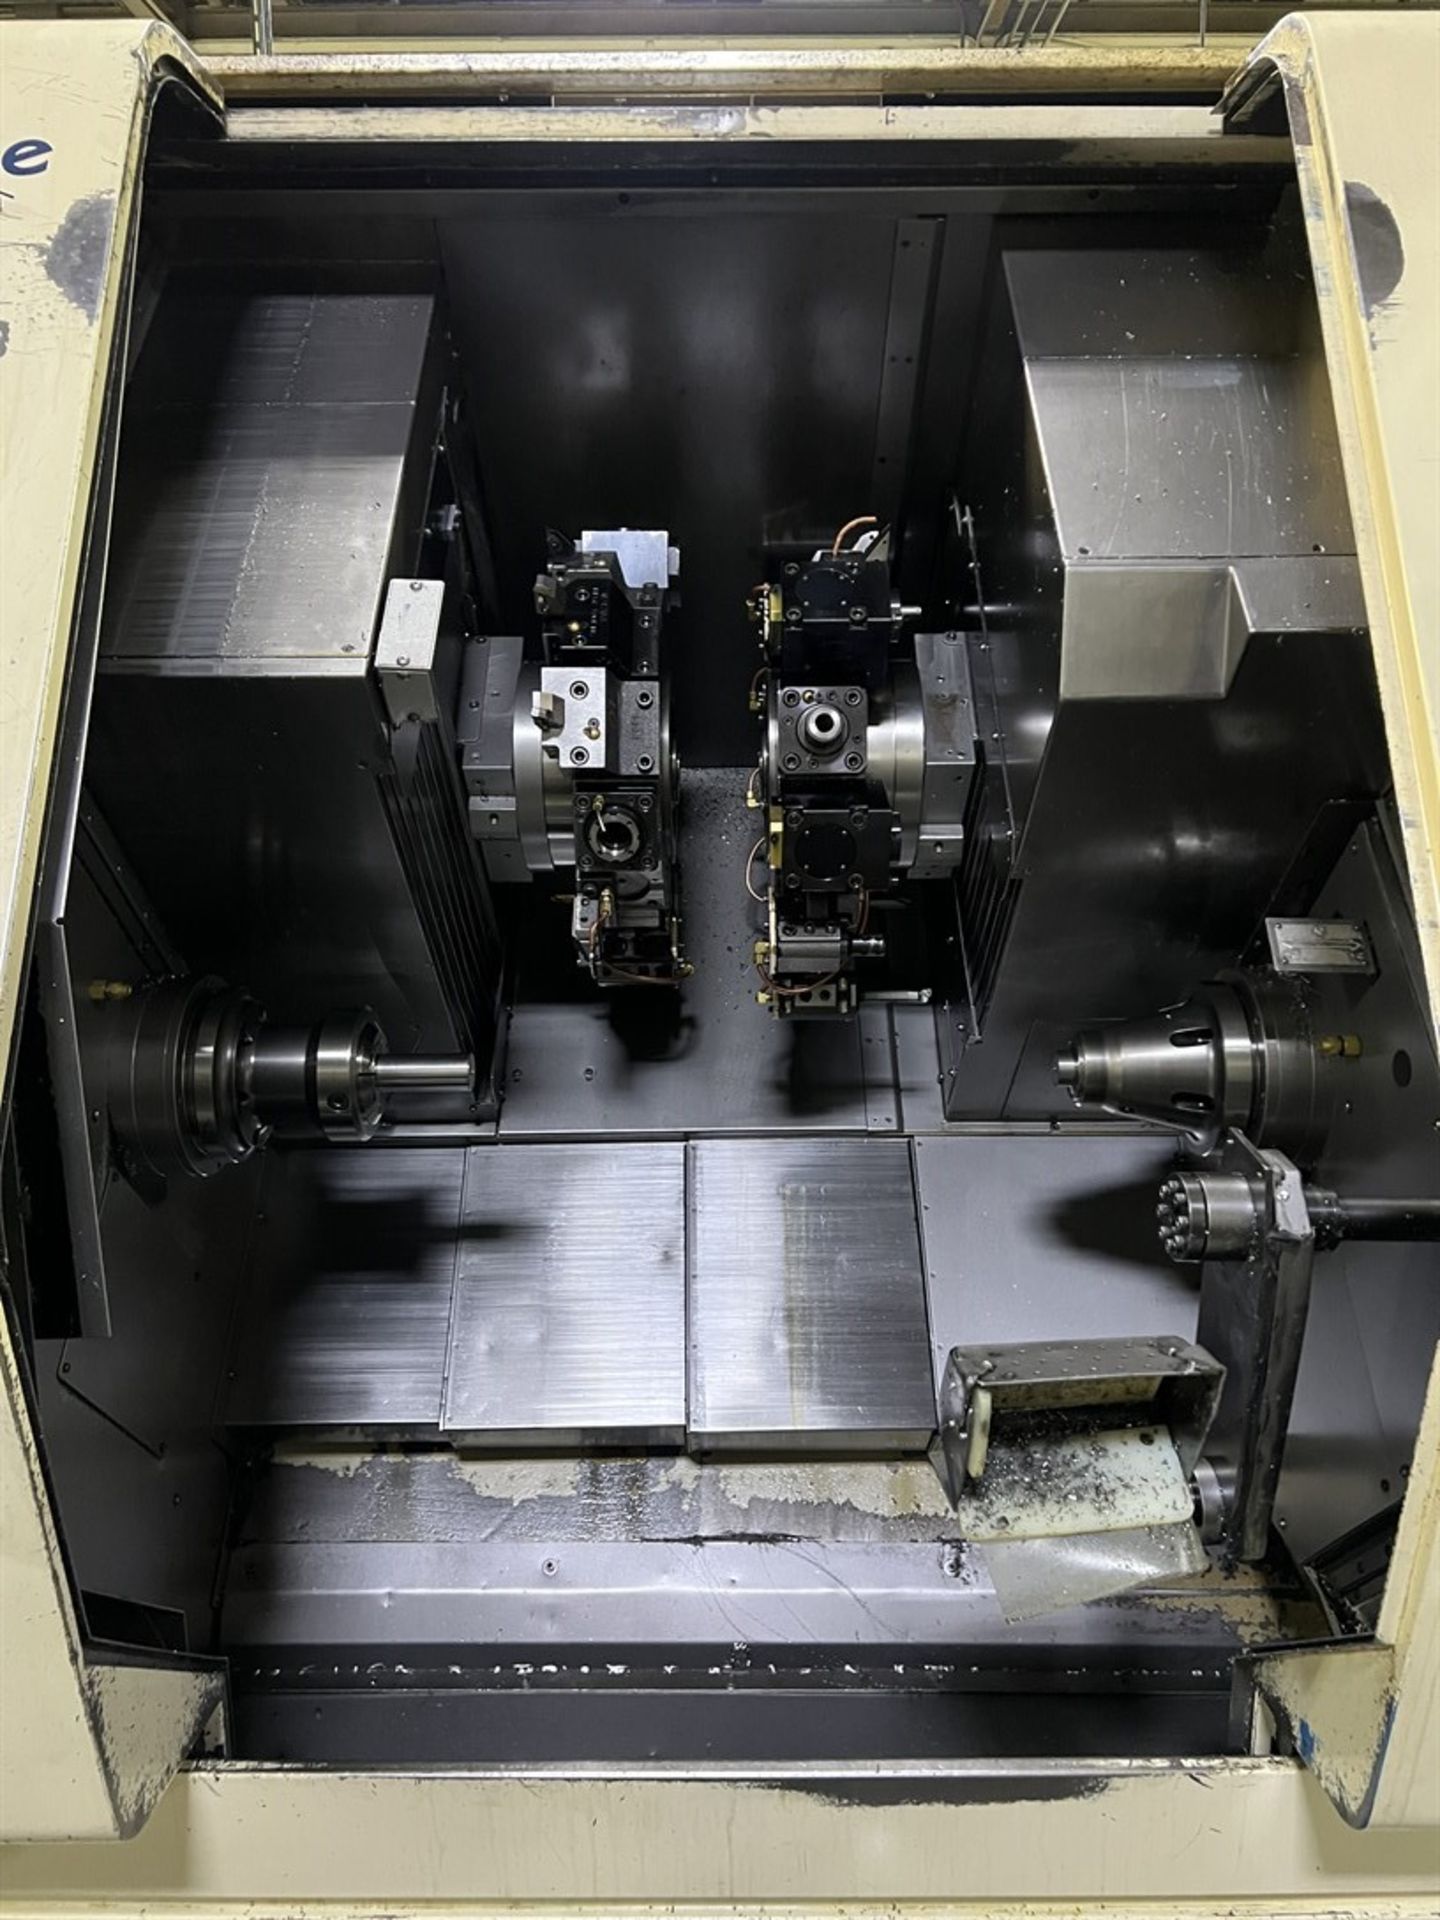 NAKAMURA-TOME TW-20 CNC Opposed Spindle Turning Center, s/n (2), Nakamura-Tome LUCK-BEI Controls, - Image 3 of 11